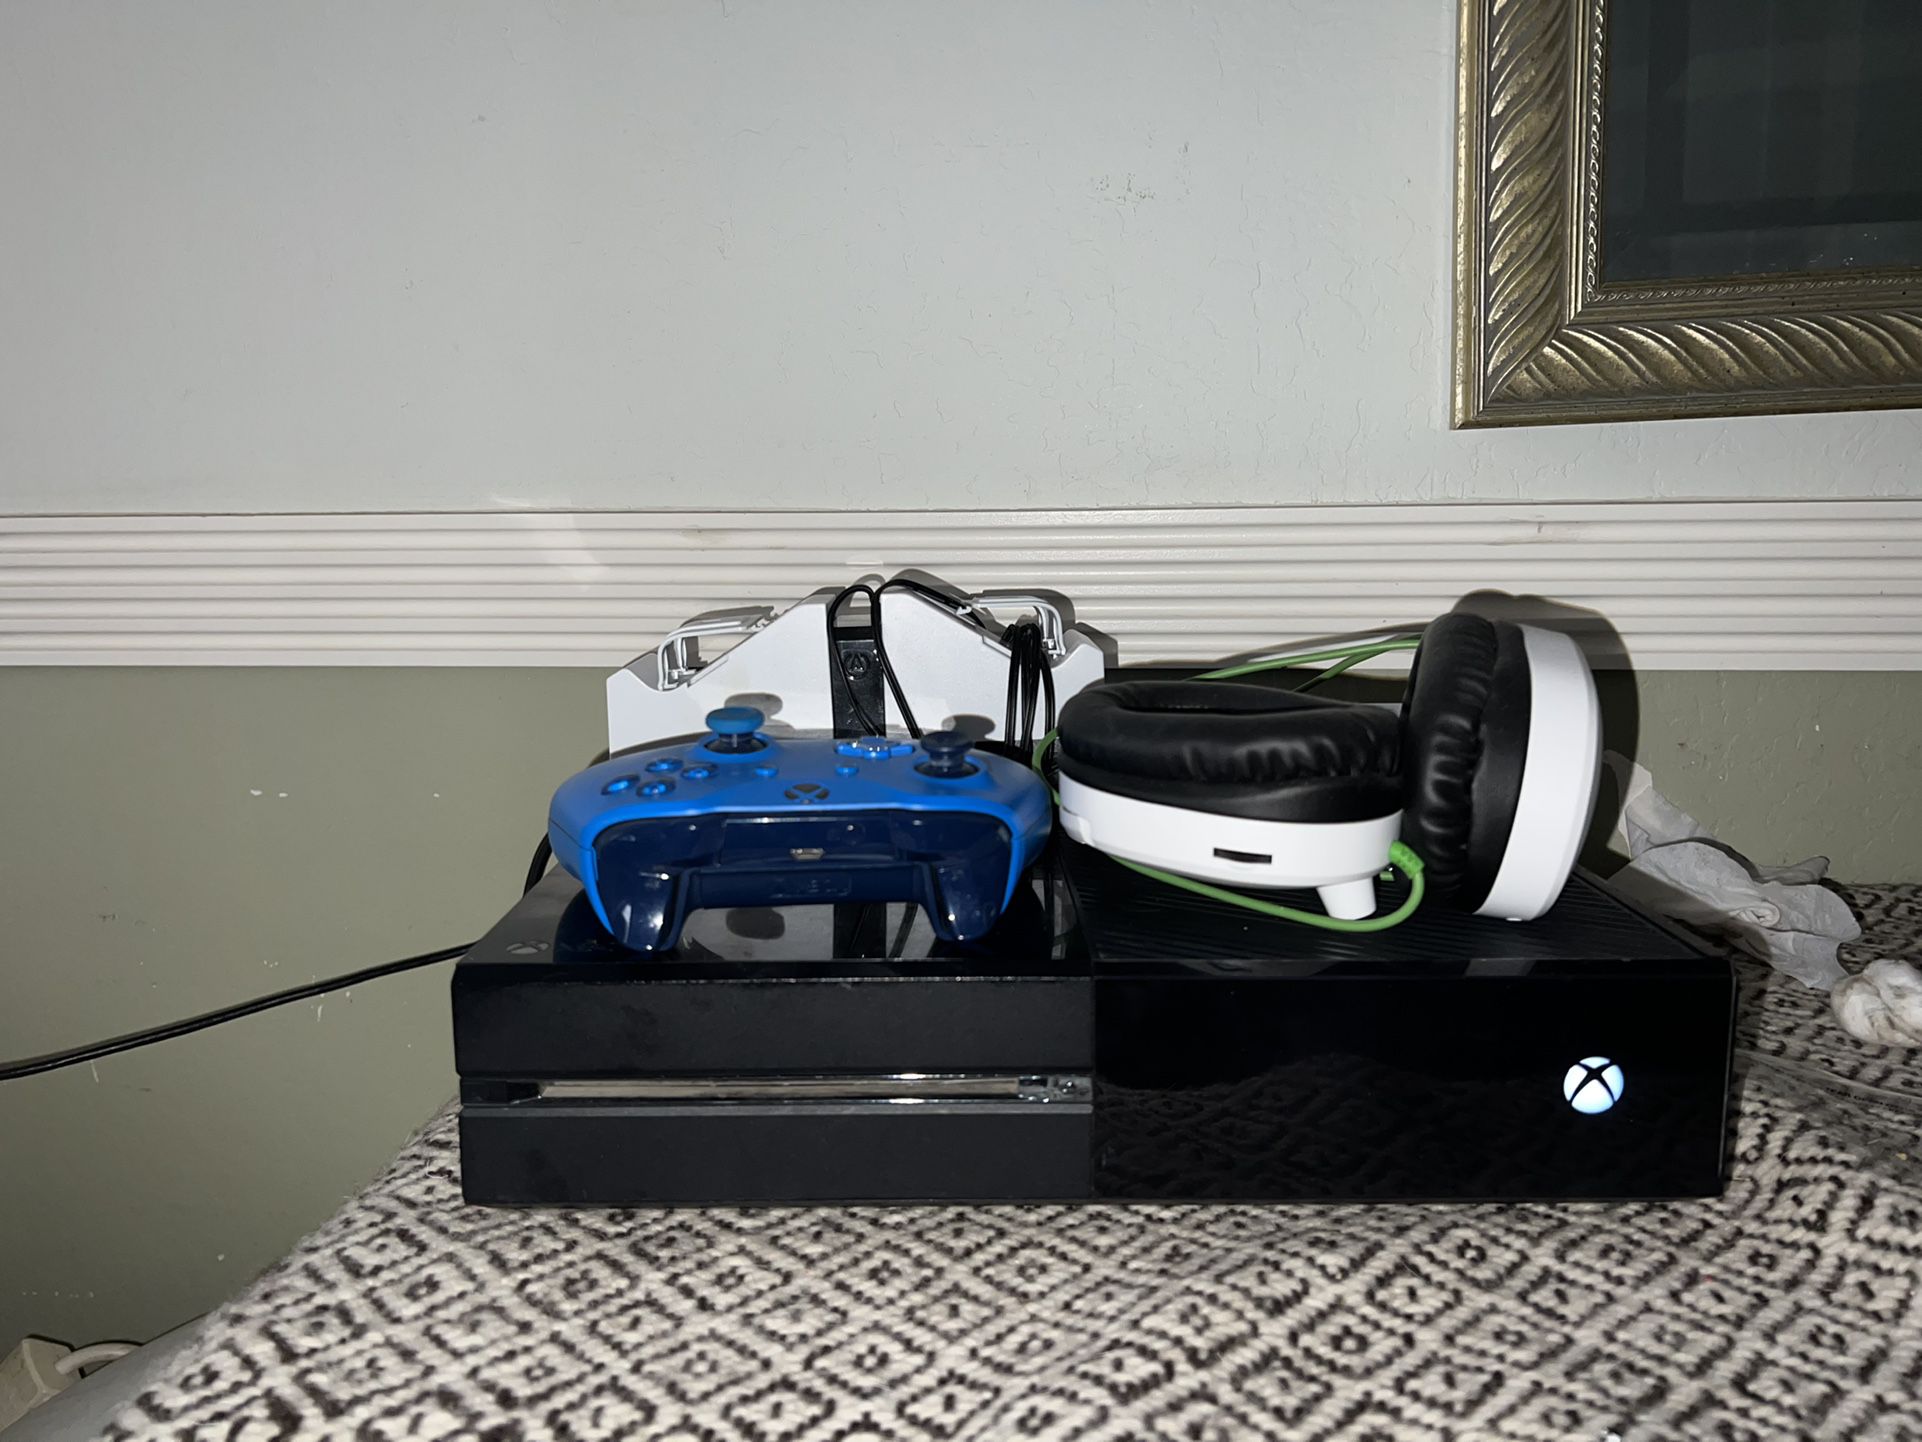 Xbox One With Accessories